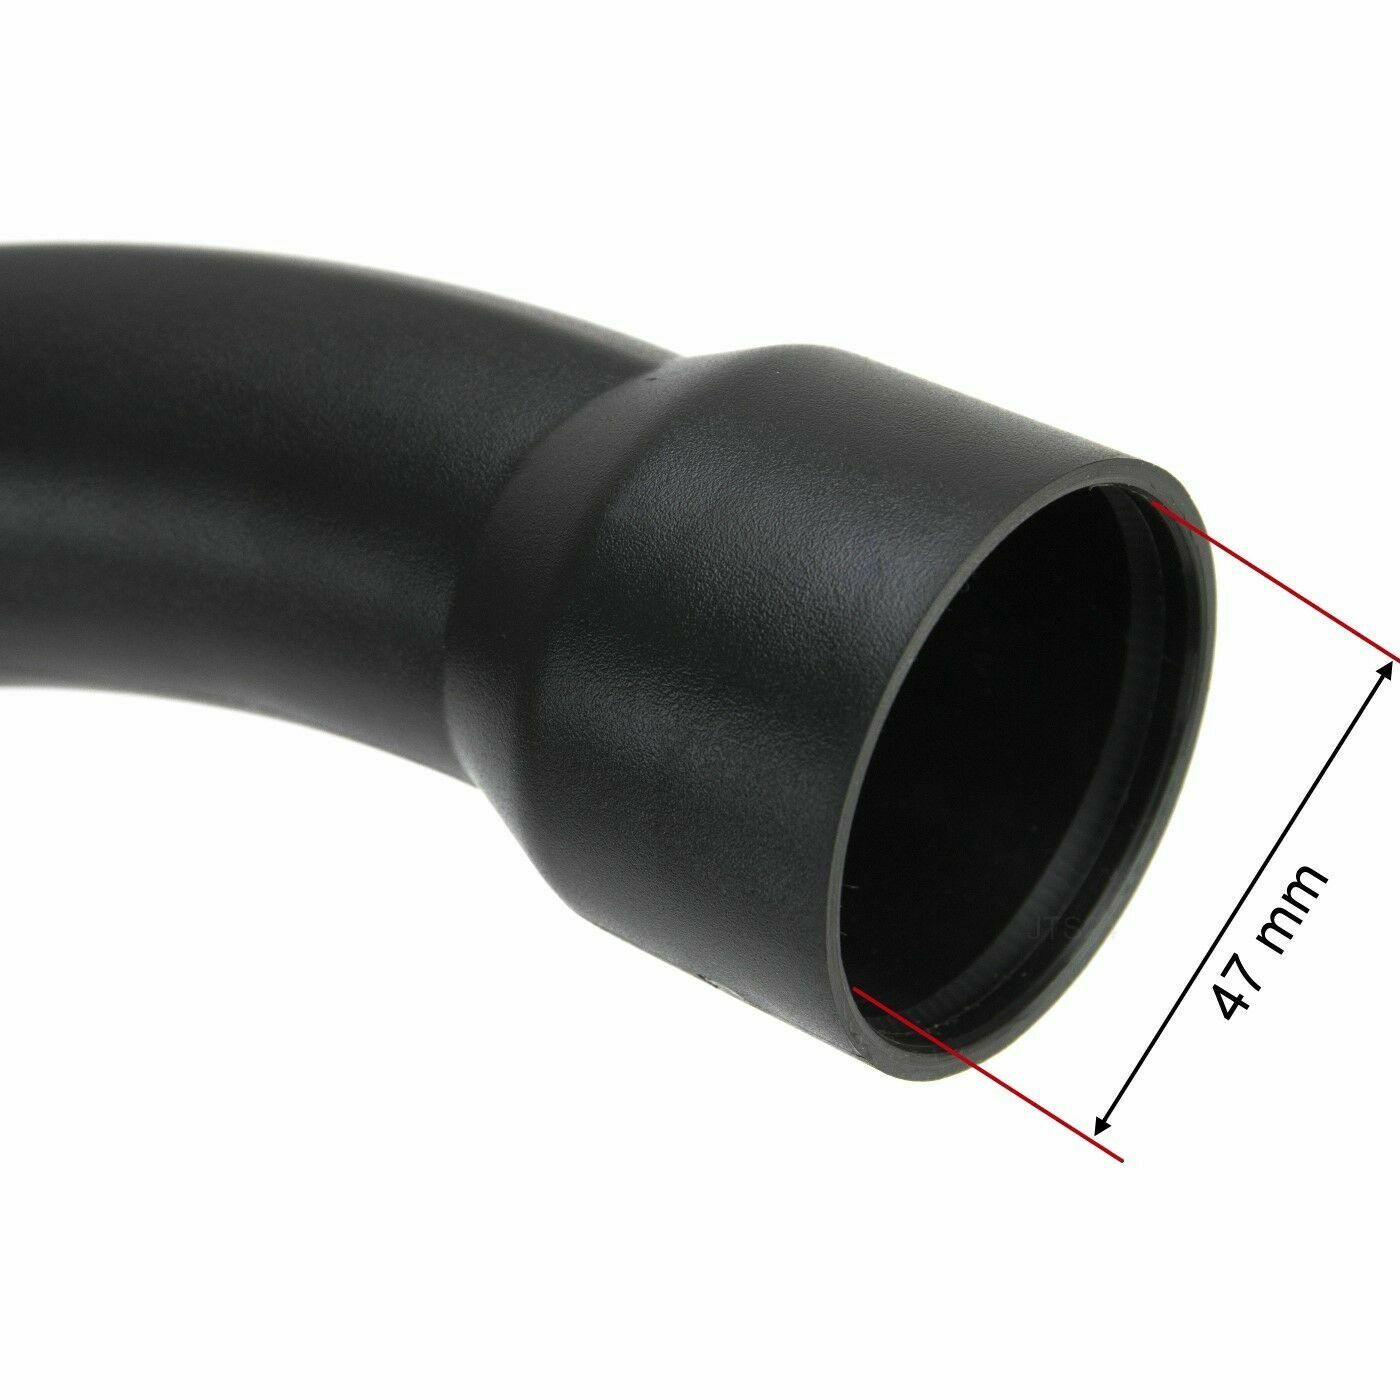 Vacuum Hose Bent End Curved Handle For Miele S5000 S8000 Complete C2 C3 S5 S6 S8 Sparesbarn